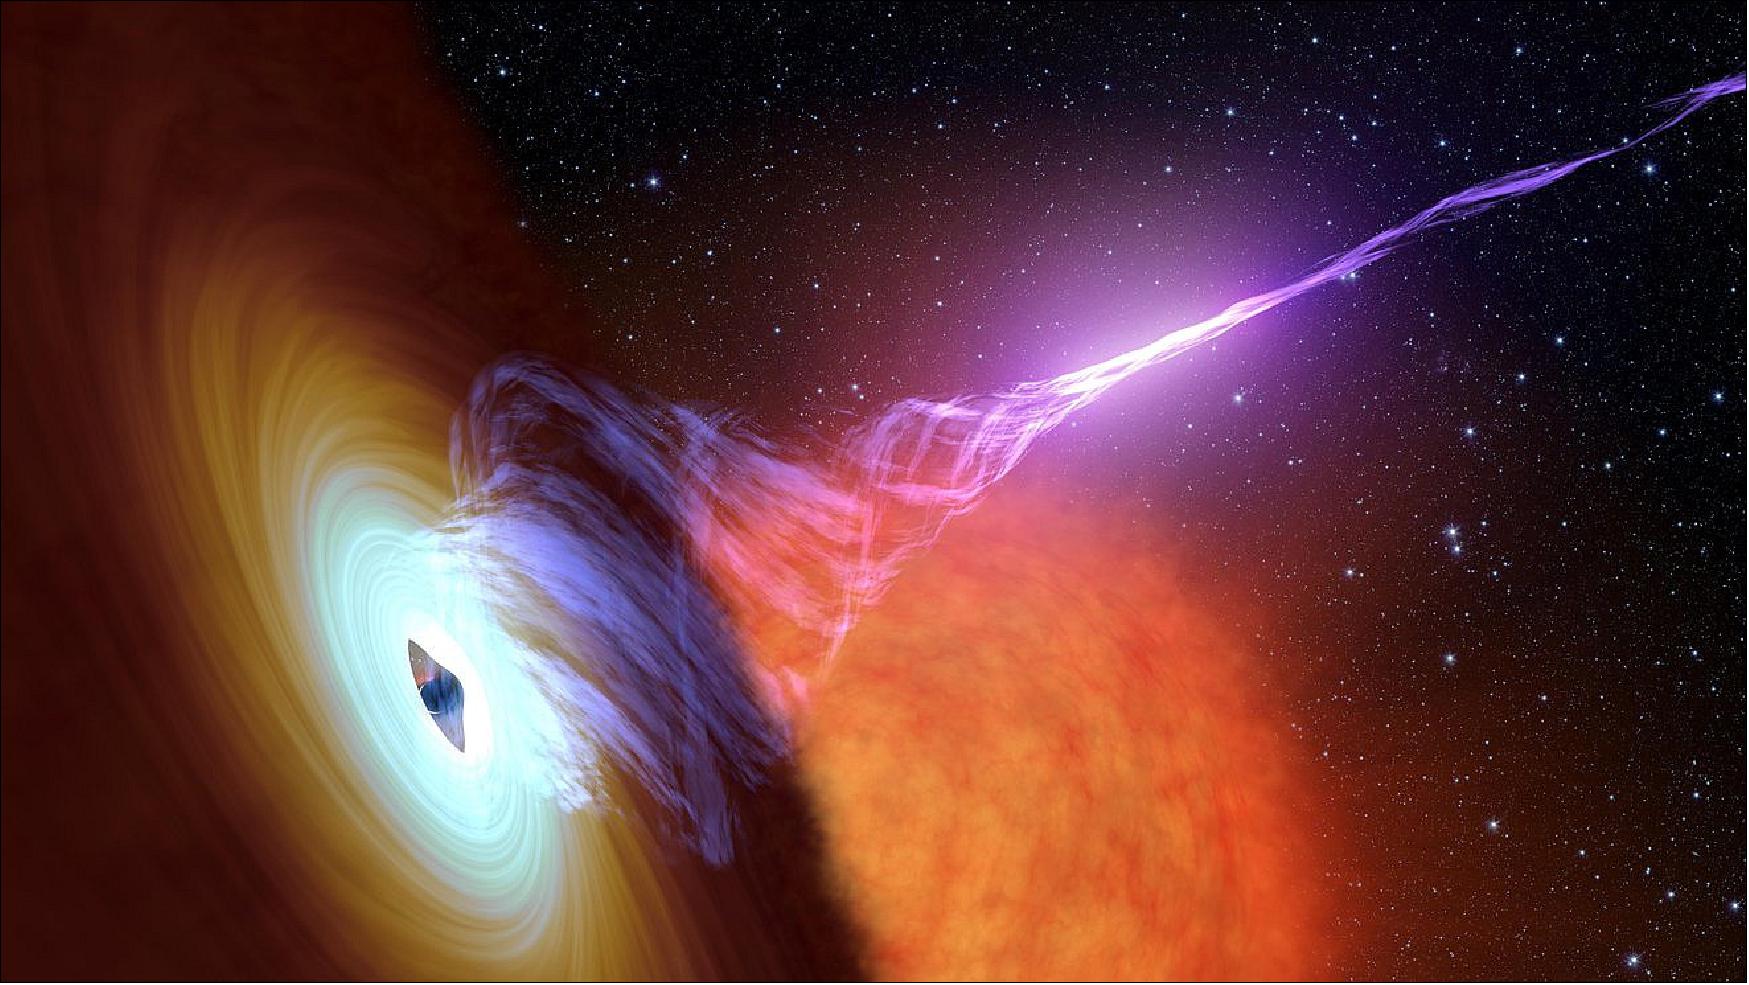 Figure 12: This illustration shows a black hole surrounded by an accretion disk made of hot gas, with a jet extending into space. NASA's NuSTAR telescope has helped measure how far particles in these jets travel before they "turn on" and become bright sources of light, a distance also known as the "acceleration zone." (image credit: NASA/JPL-Caltech)